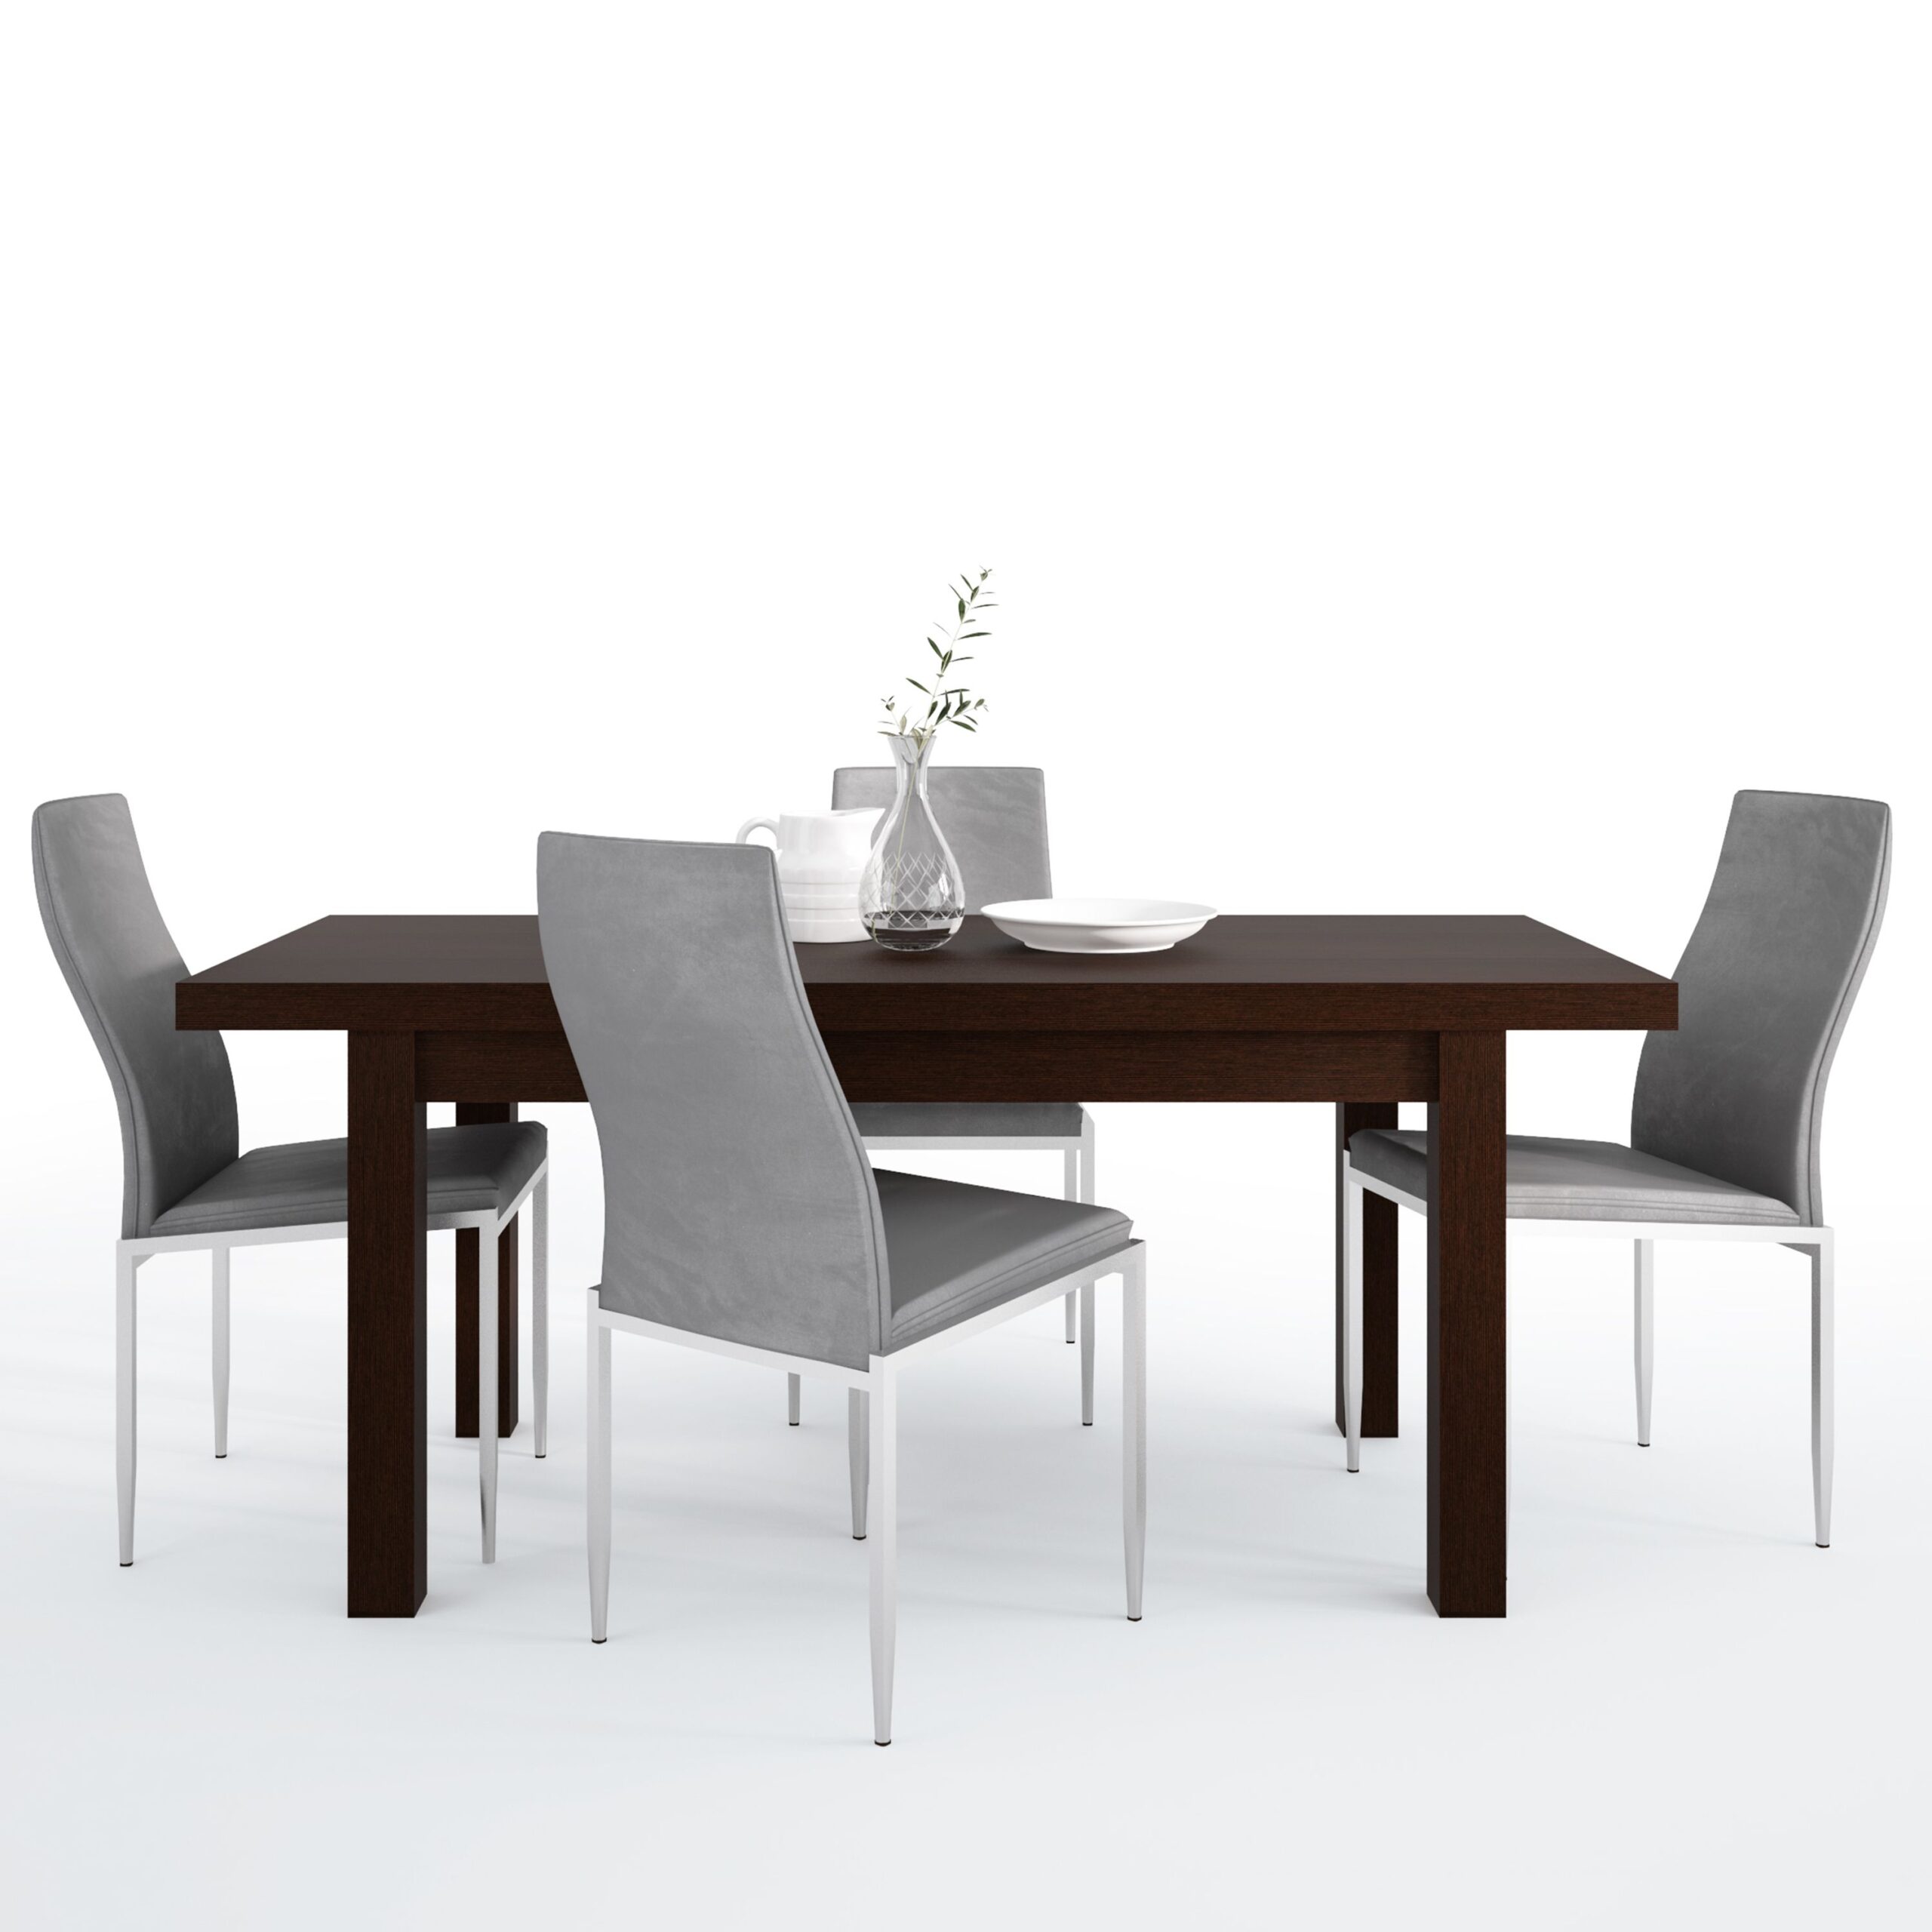 Jello Dining set package Jello Extending Dining Table in Dark Mahogany + 4 Lillie High Back Chair Grey